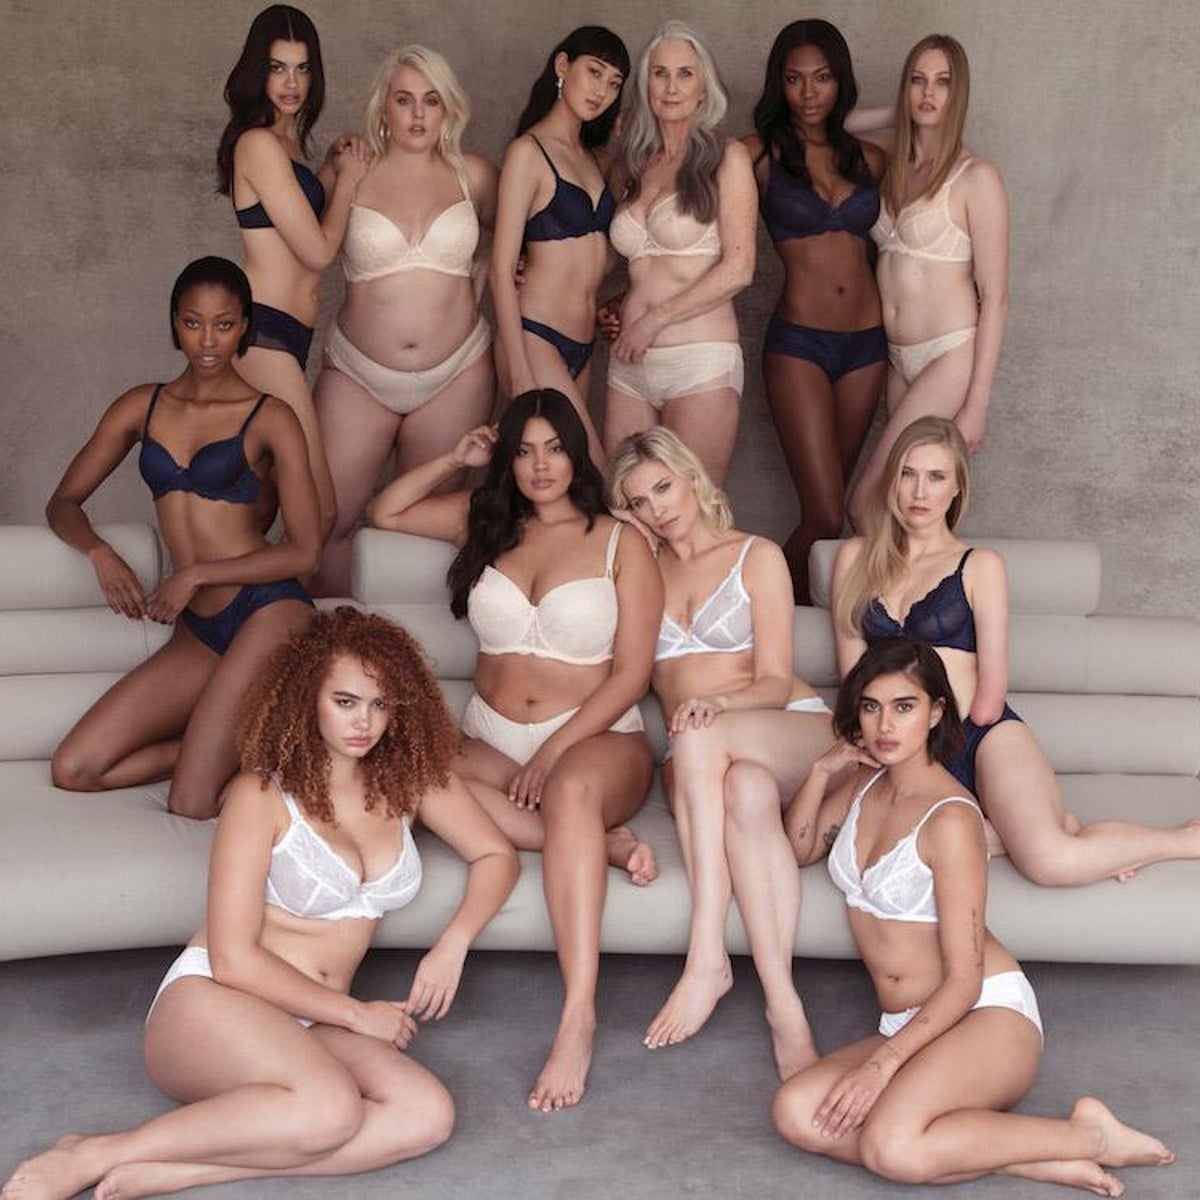 Lingerie company Figleaves celebrates body diversity with